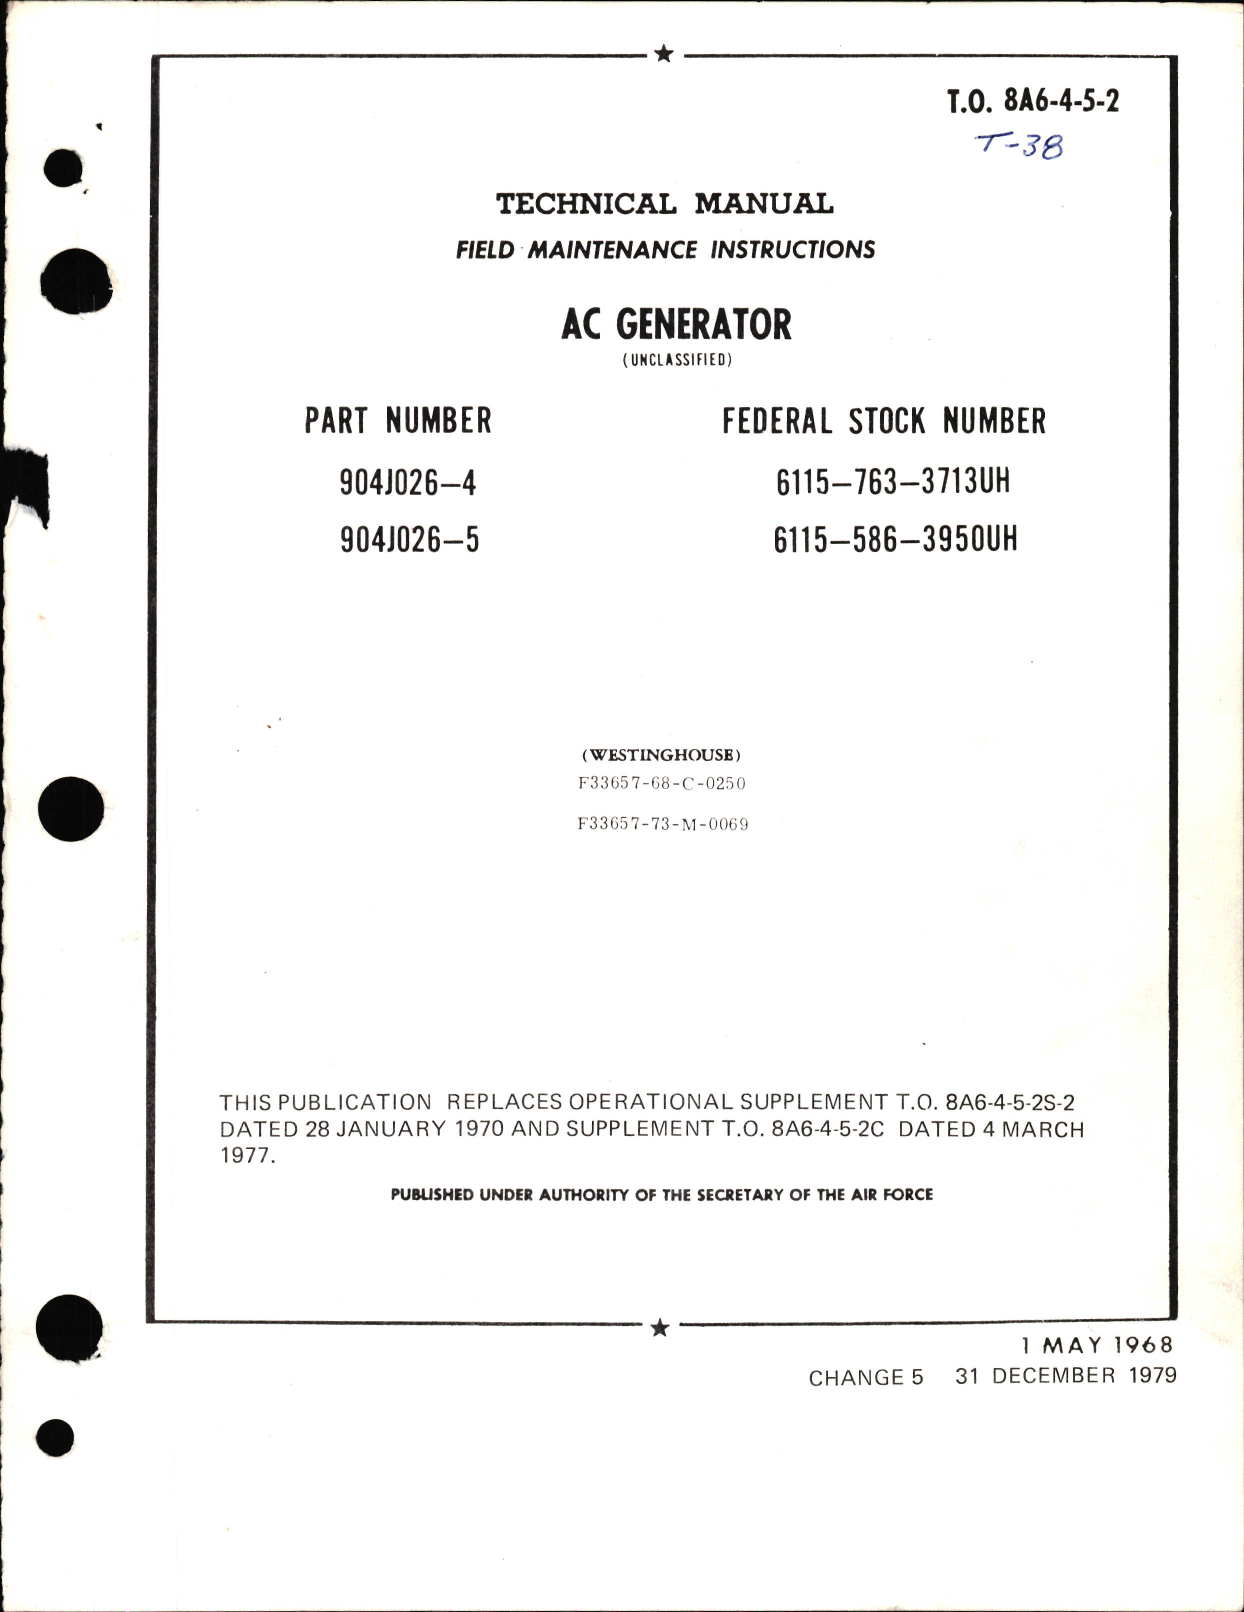 Sample page 1 from AirCorps Library document: Field Maintenance Instructions for AC Generator 904J026-4 and -5 